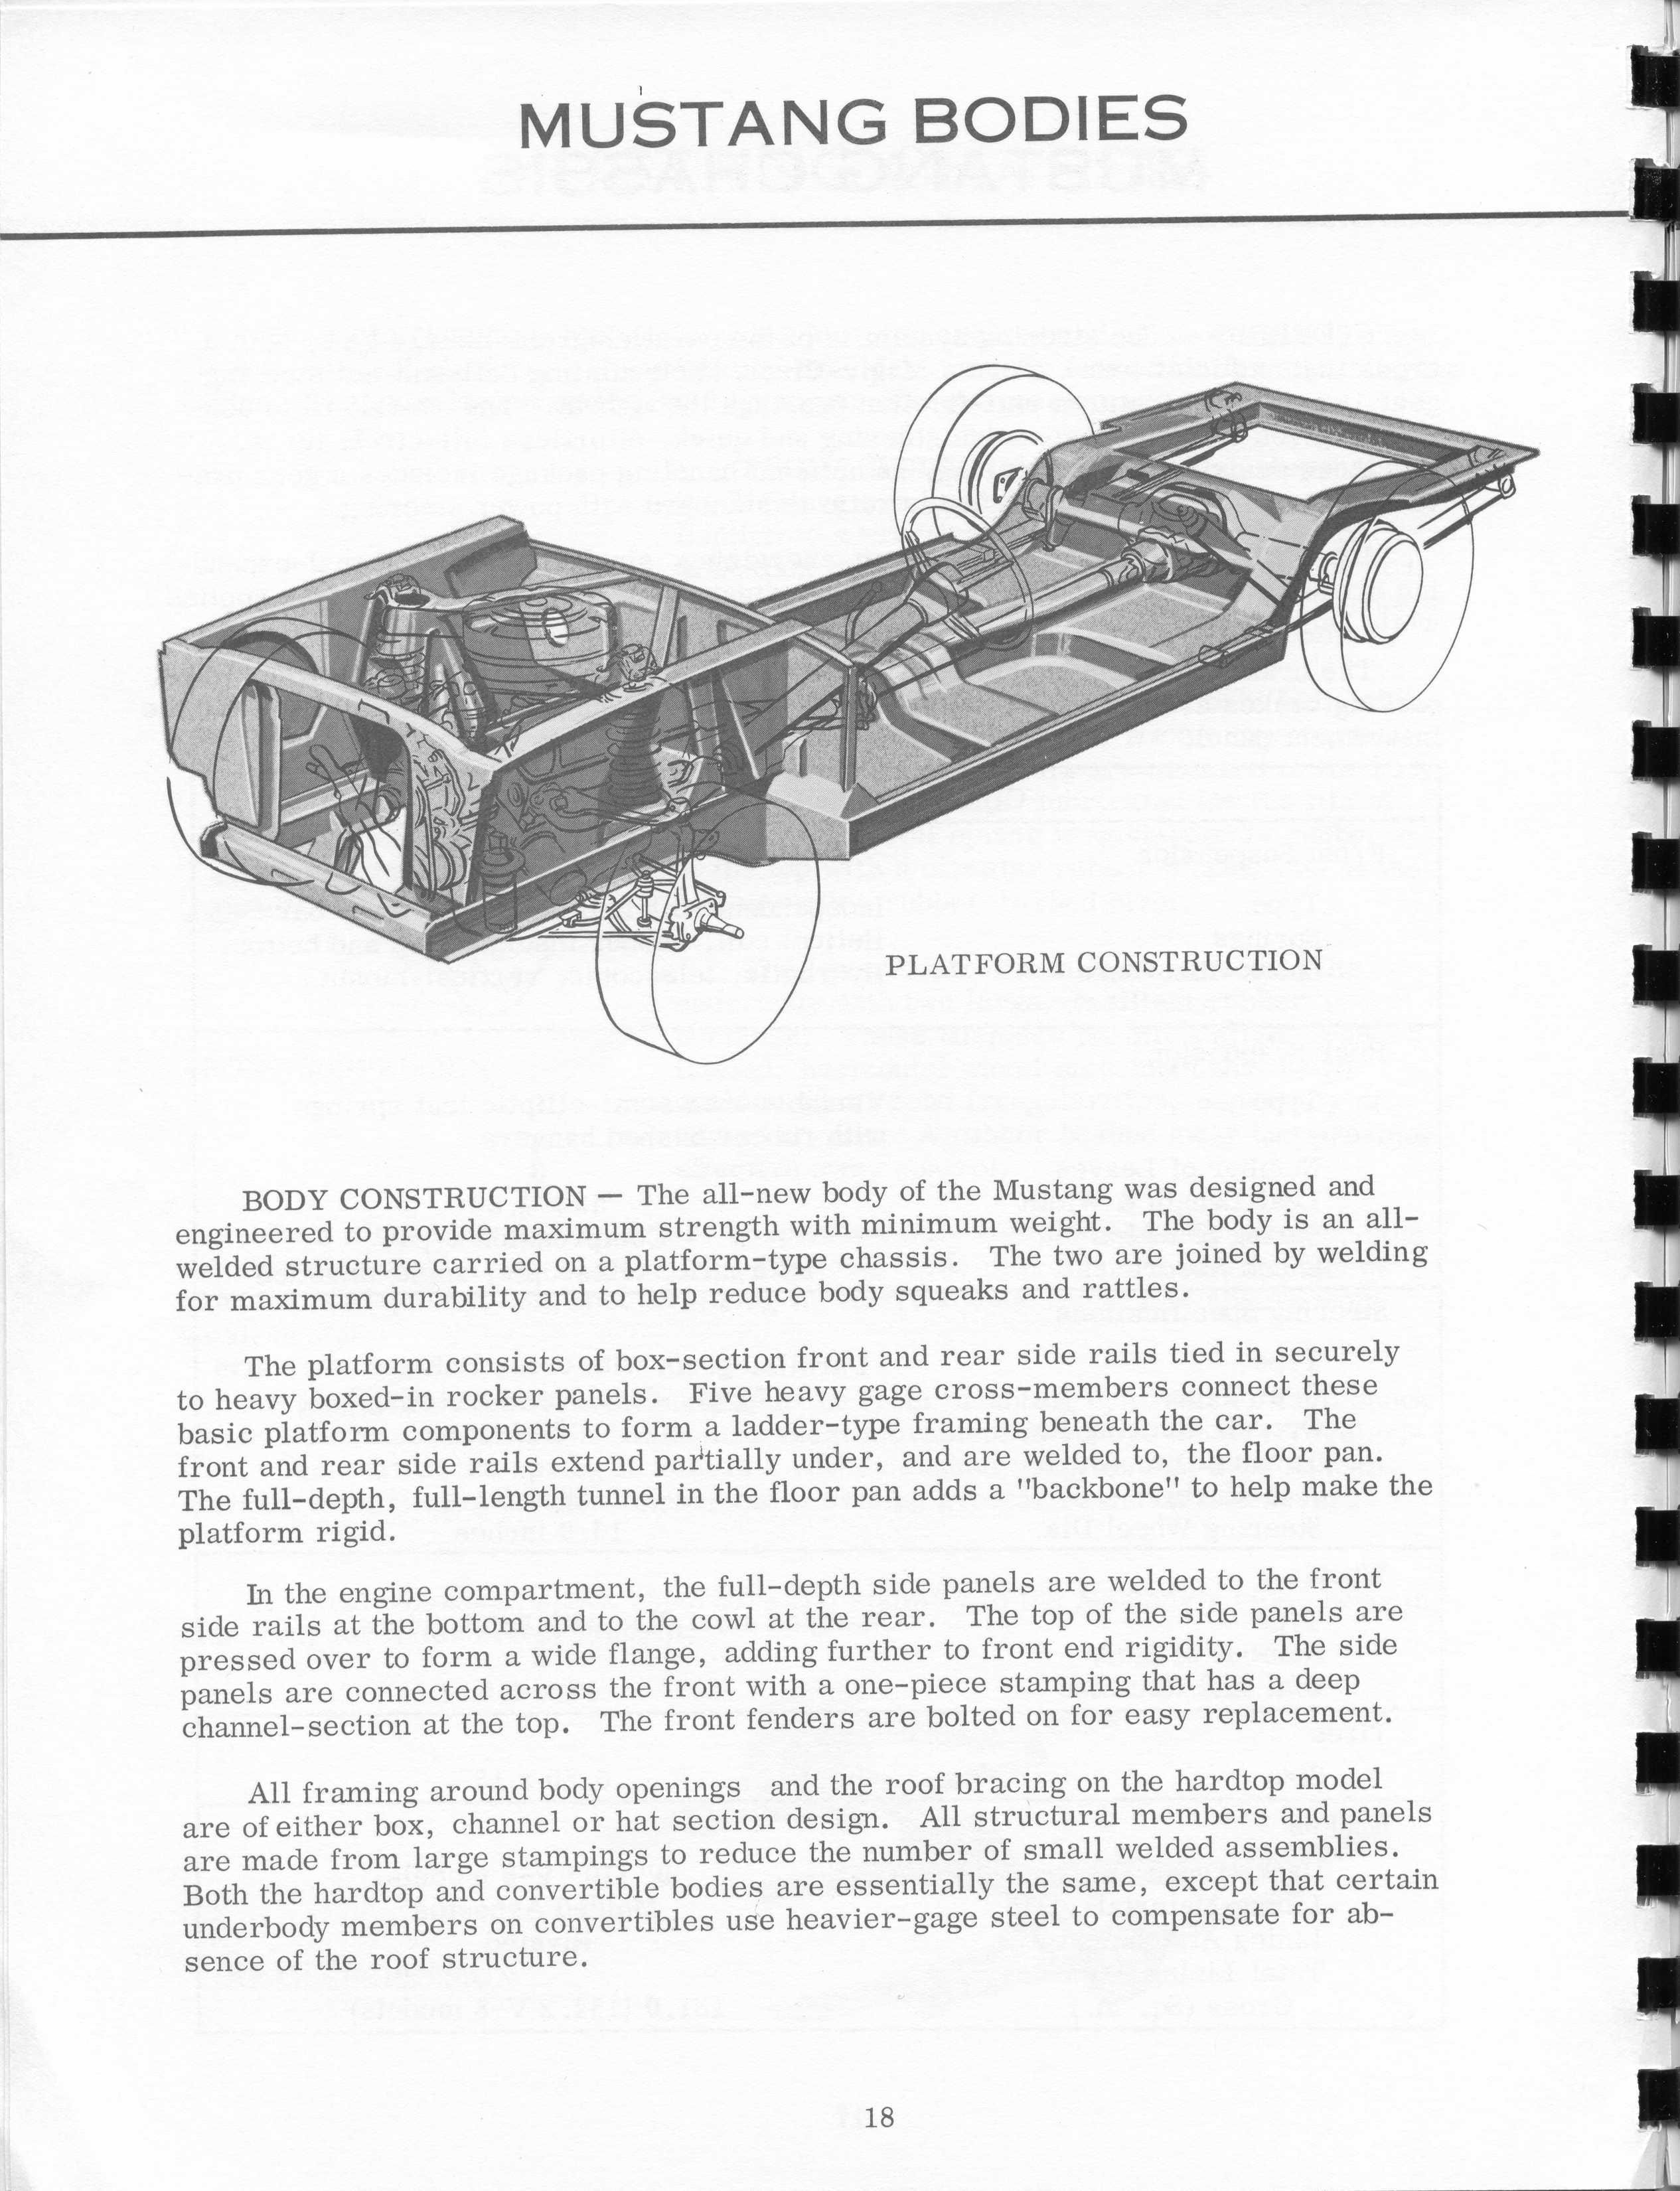 1964_Ford_Mustang_Press_Packet-18